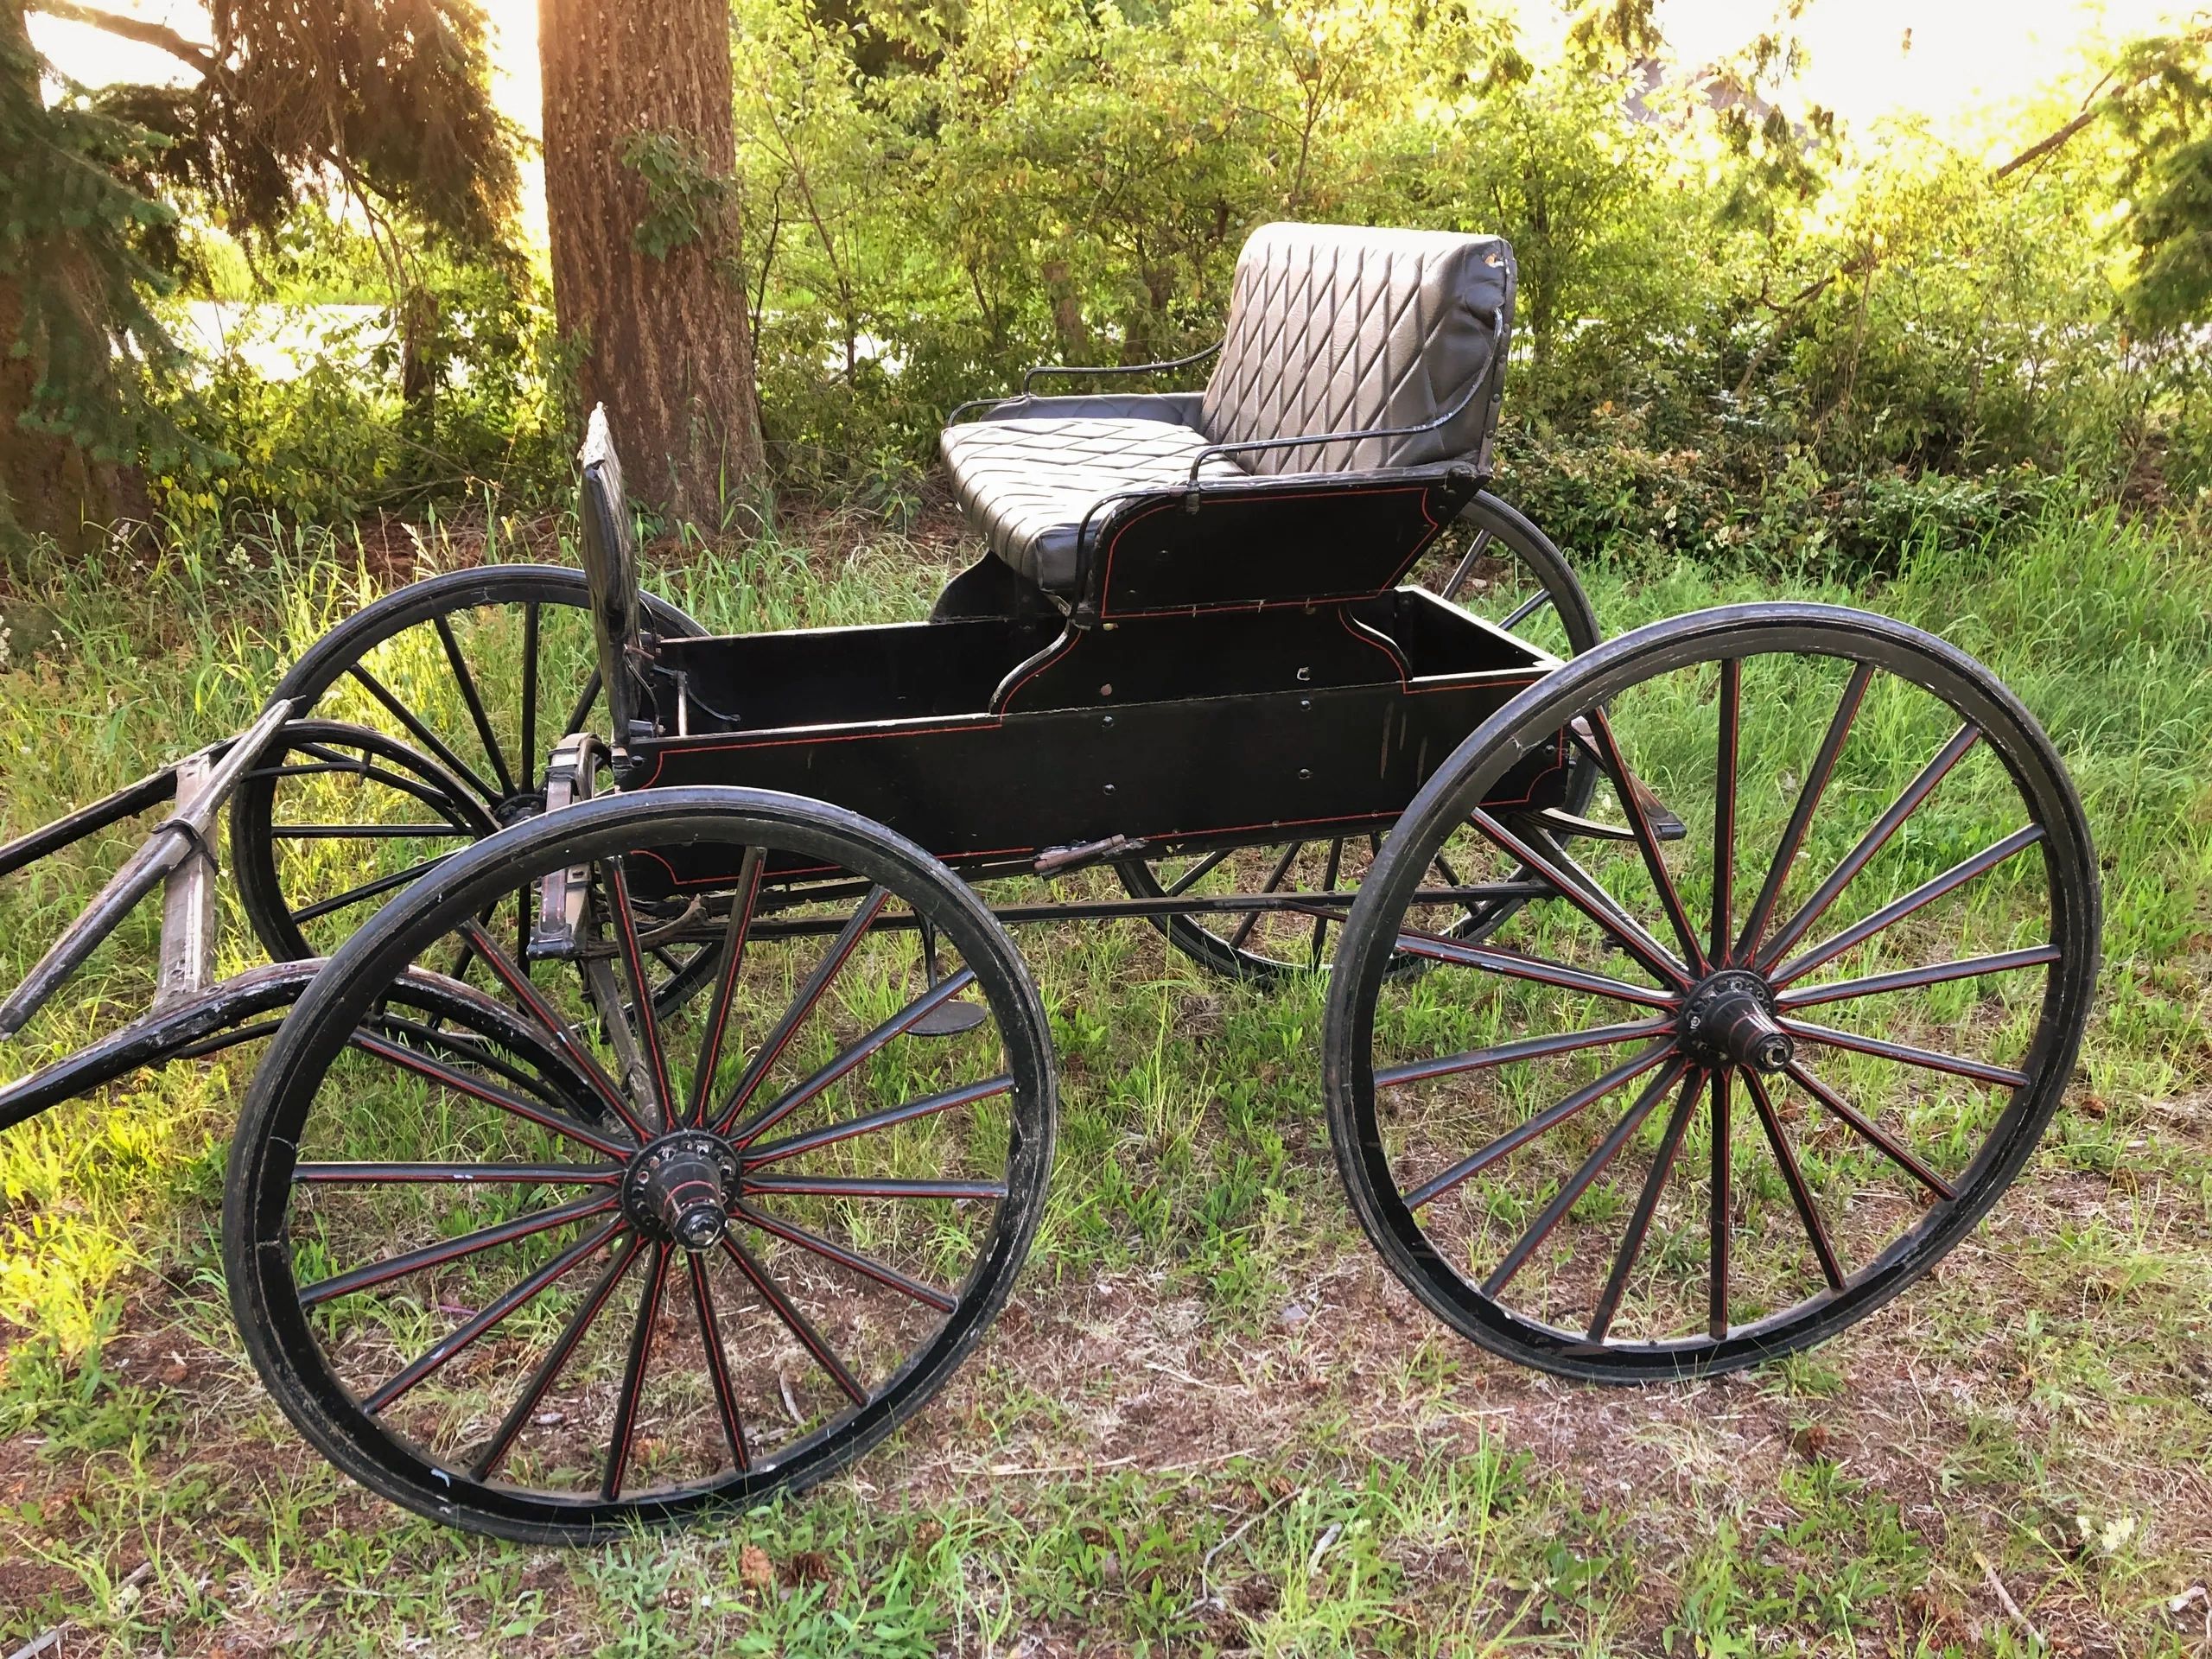 Rusticana Rentals - The Phaeton (doctor's buggy)